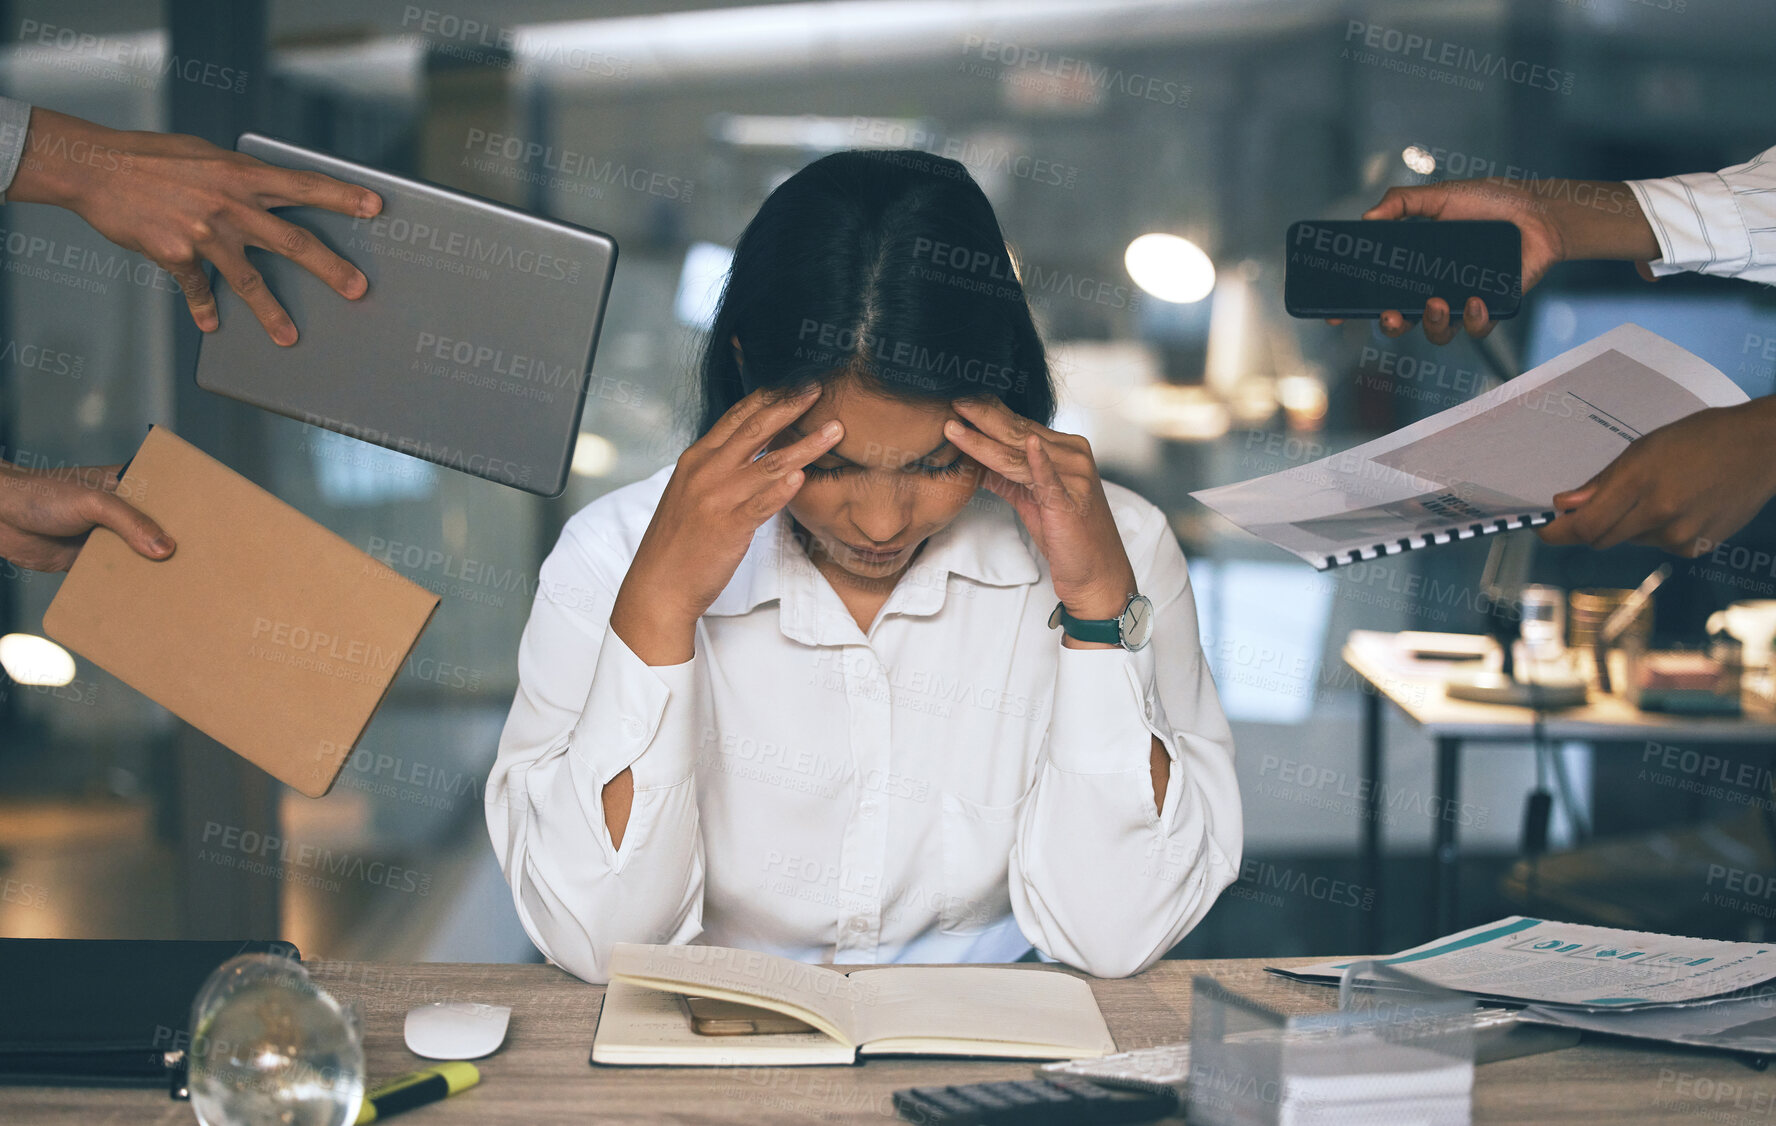 Buy stock photo Shot of a young businesswoman suffering from a headache in a demanding work environment